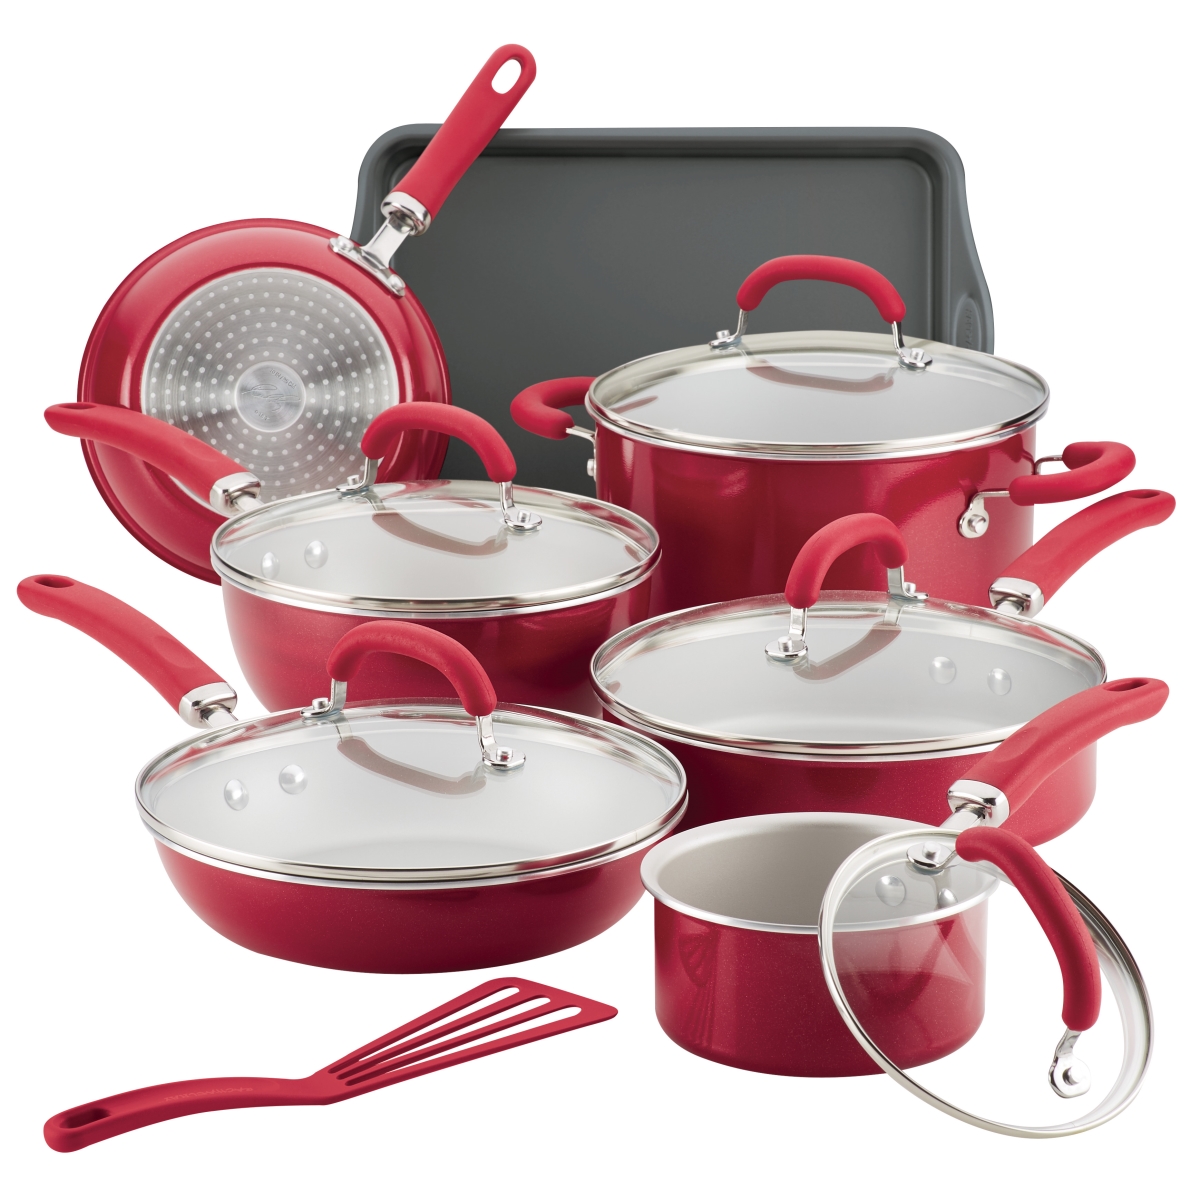 Picture of Rachael Ray 12147 Create Delicious Aluminum Nonstick Cookware Set, 13 Piece - Red Shimmer